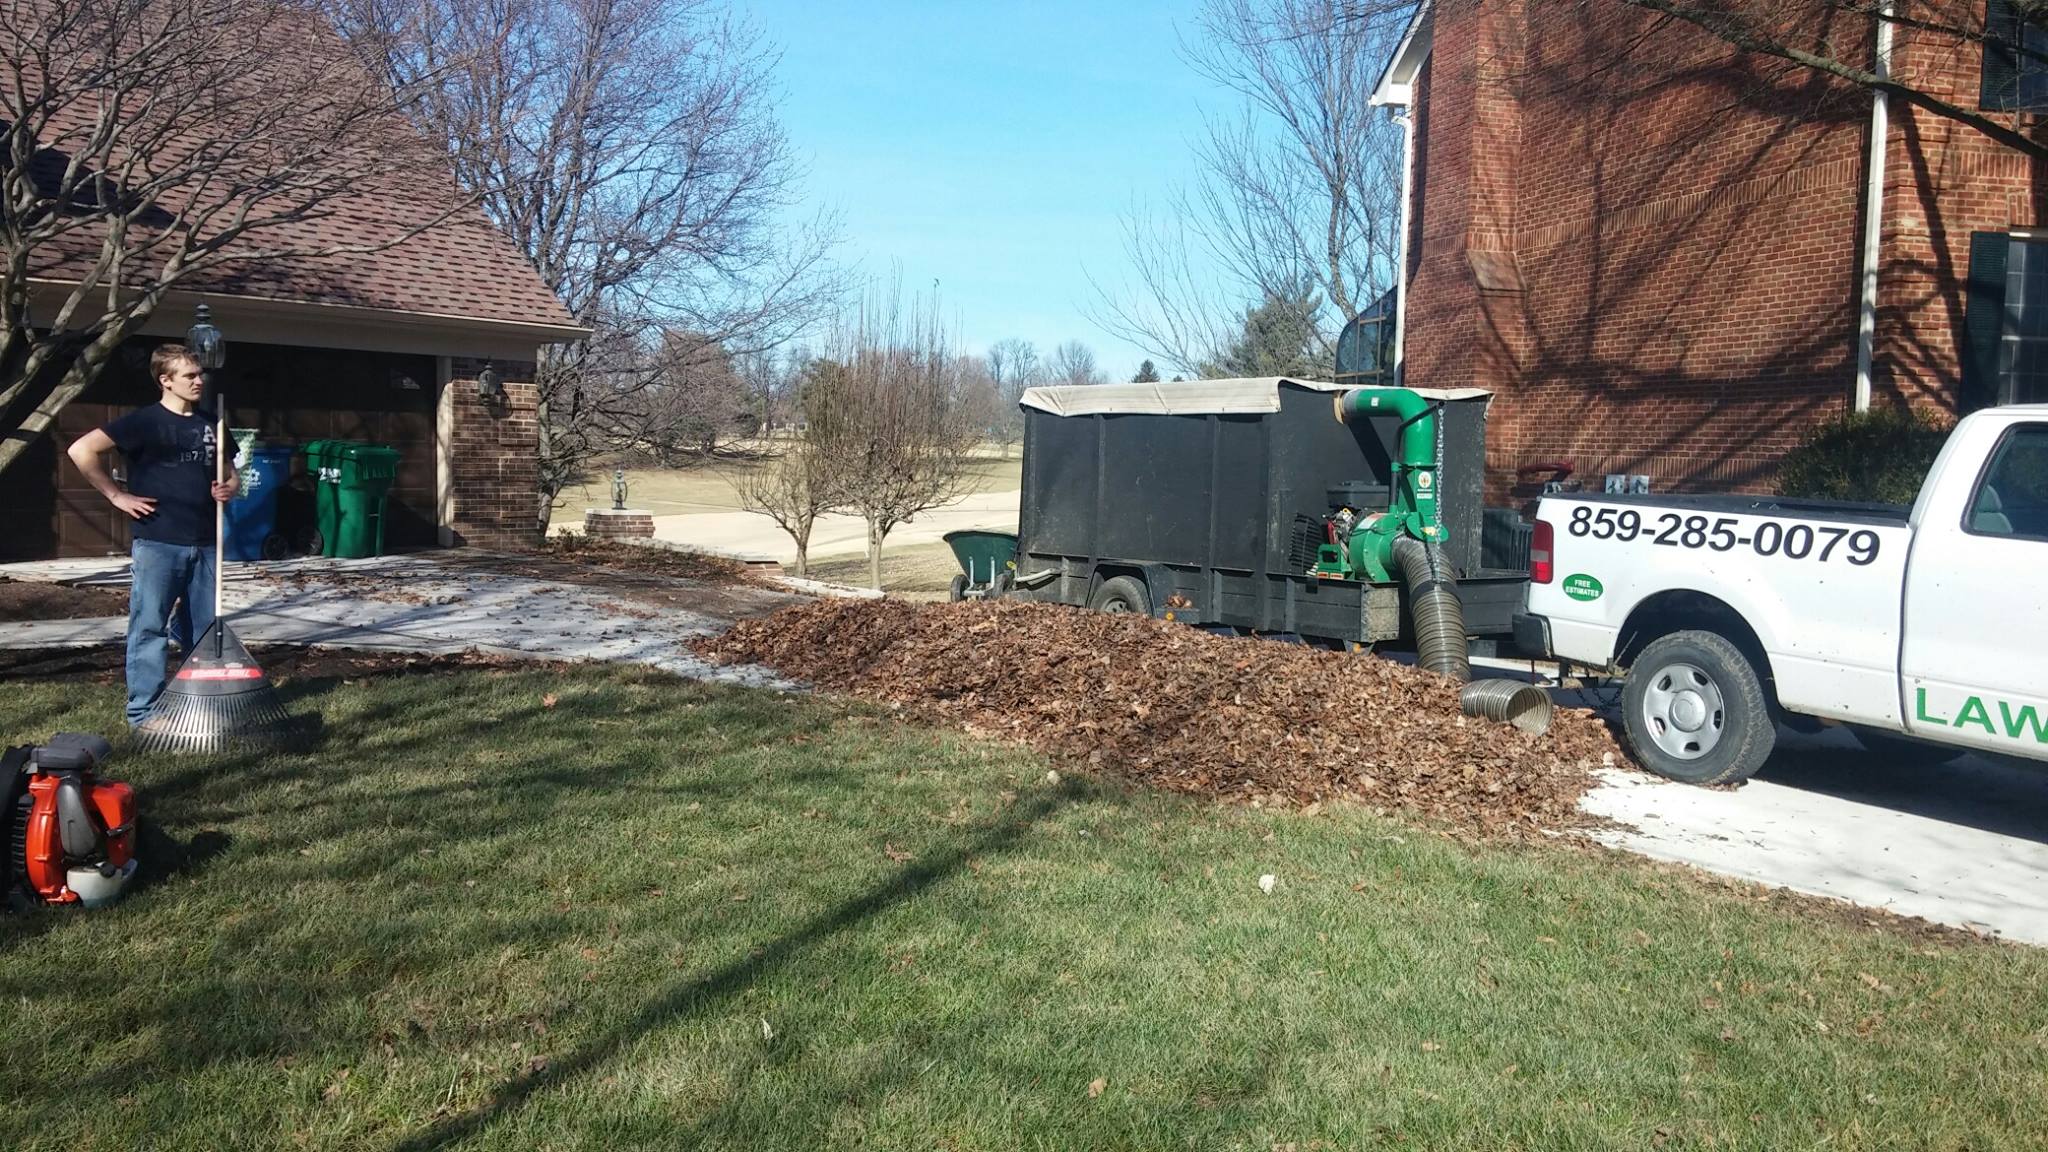 What services does the landscaping company offer, and what specific tasks can they assist with?